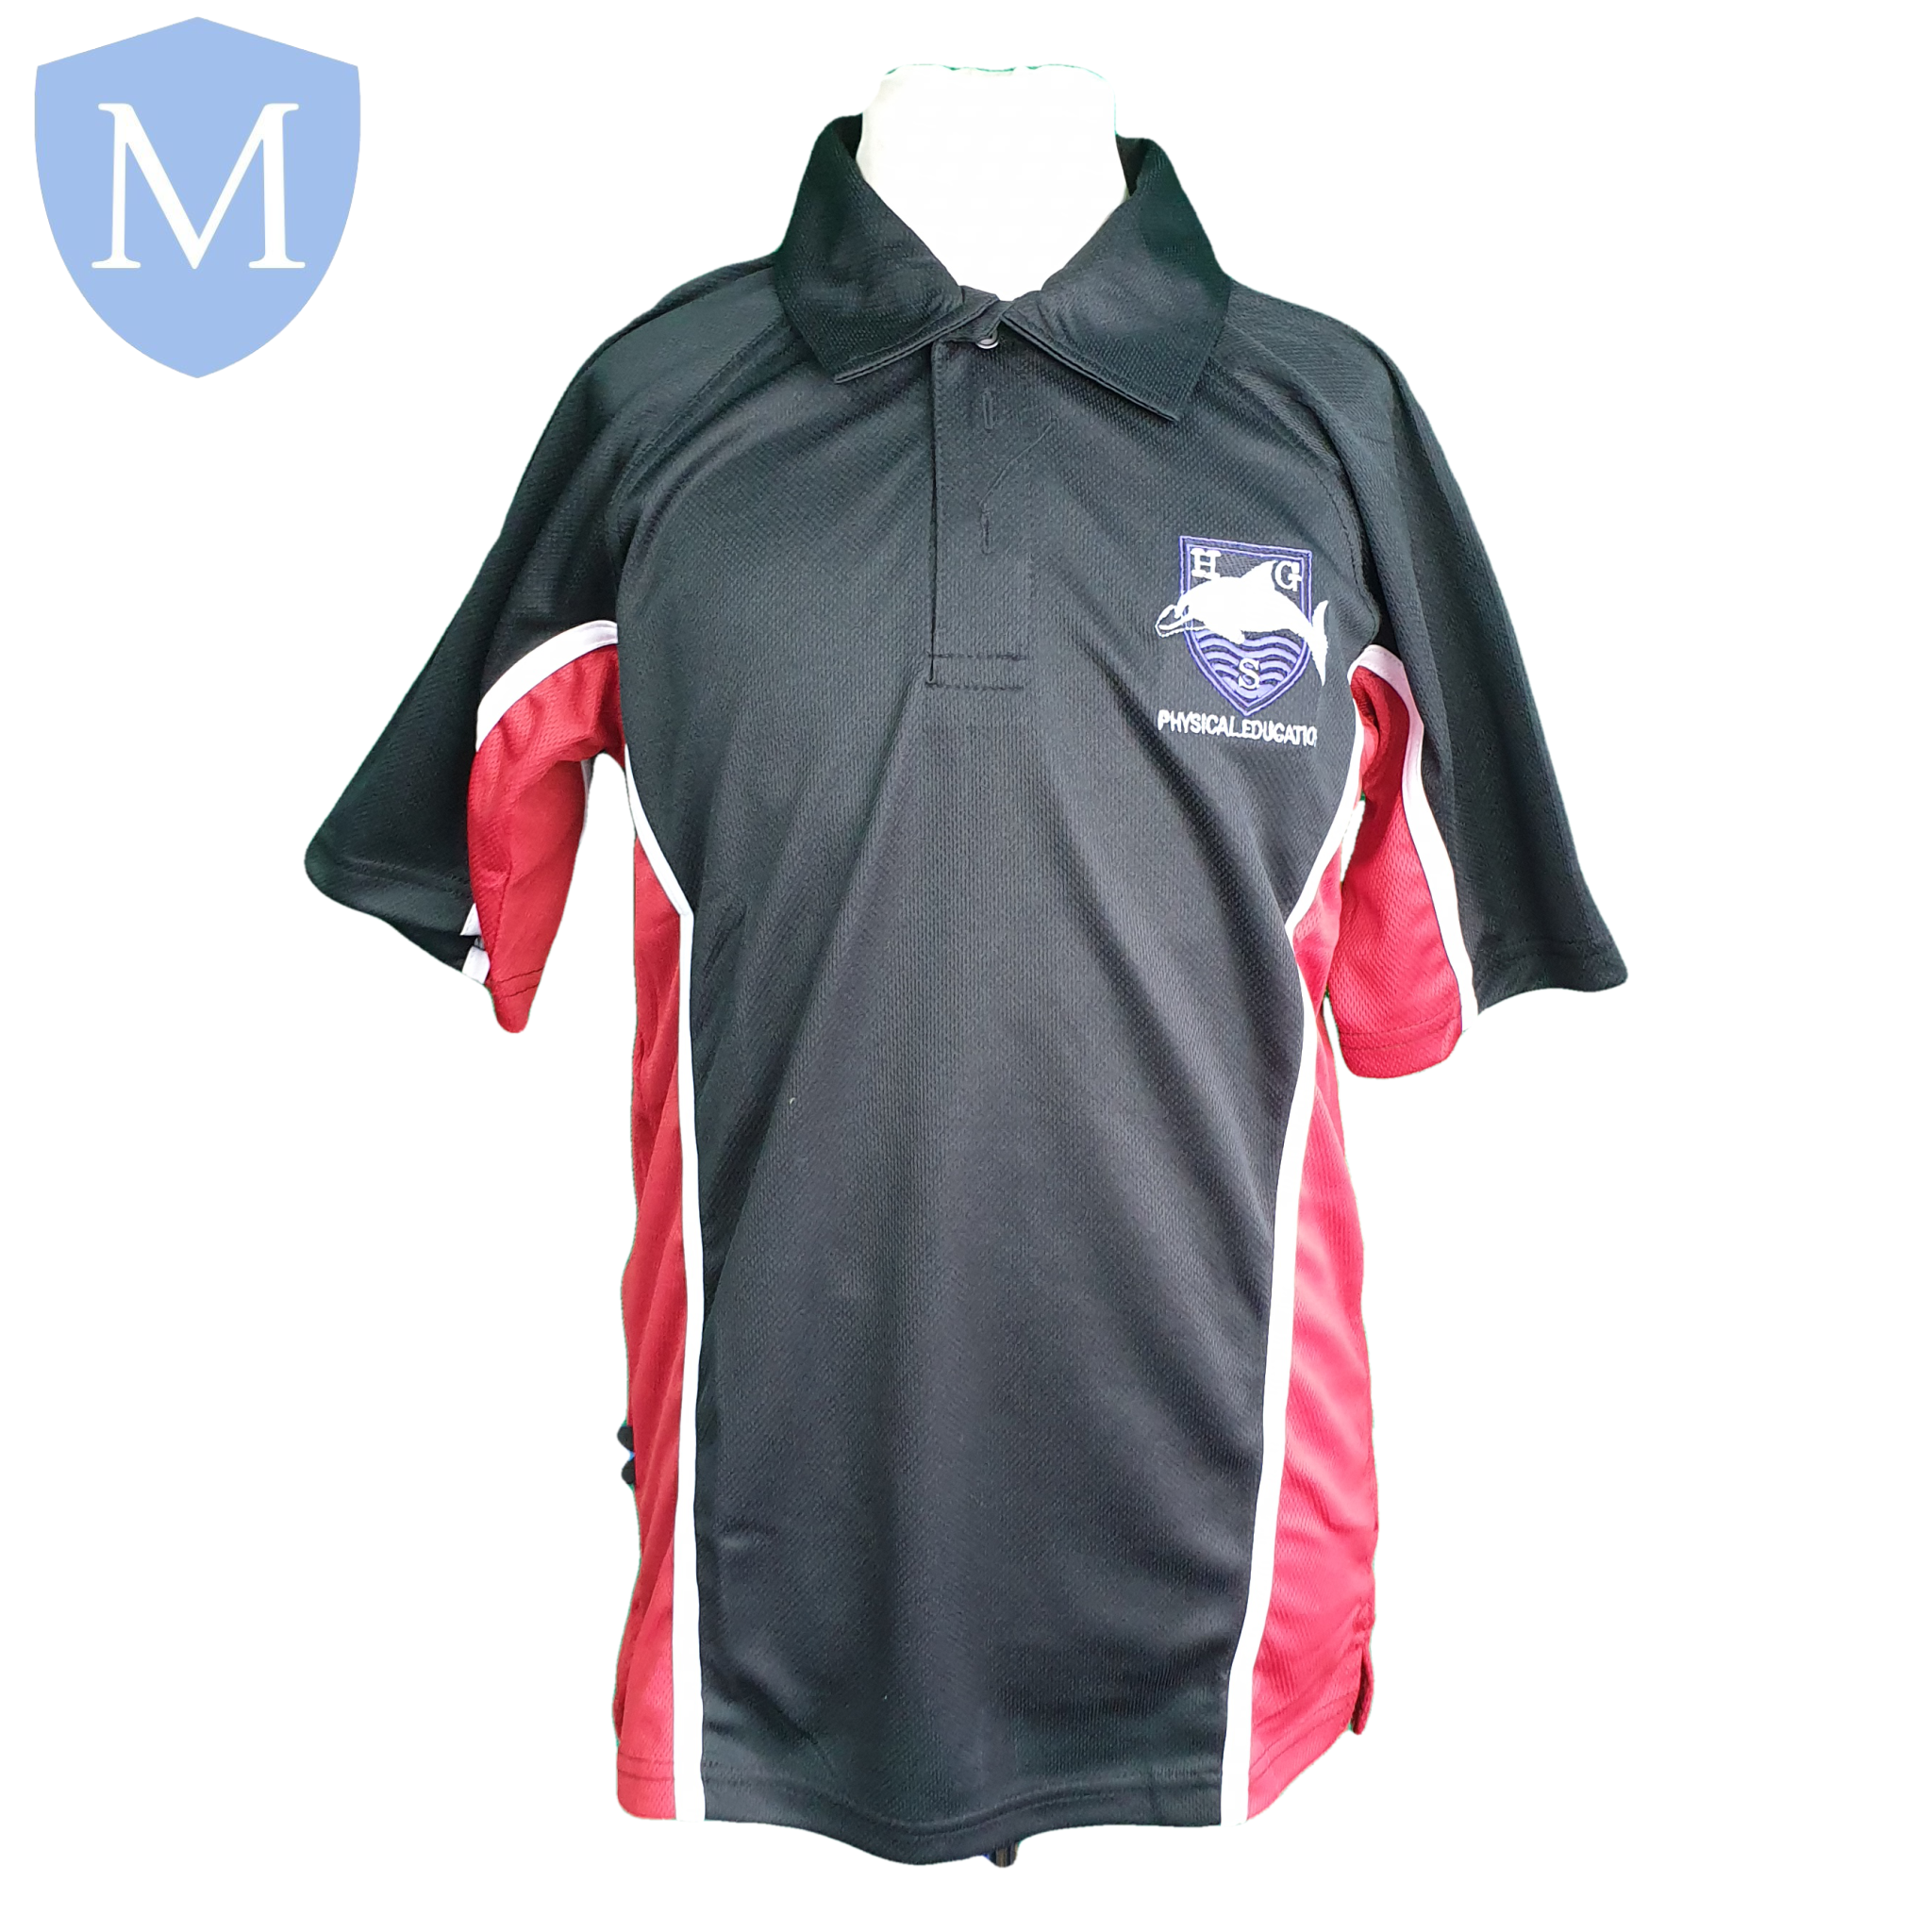 Hall Green Secondary Sports Polo - Red (Unisex) 30-32 (XS - 12 Years),32-34 (Small - 13 Years),34-36 (Medium - 14 Years),38-40 (large 15-16 Years),42-44 (X-Large),46-48 (XXL),50-52 (XXXL)